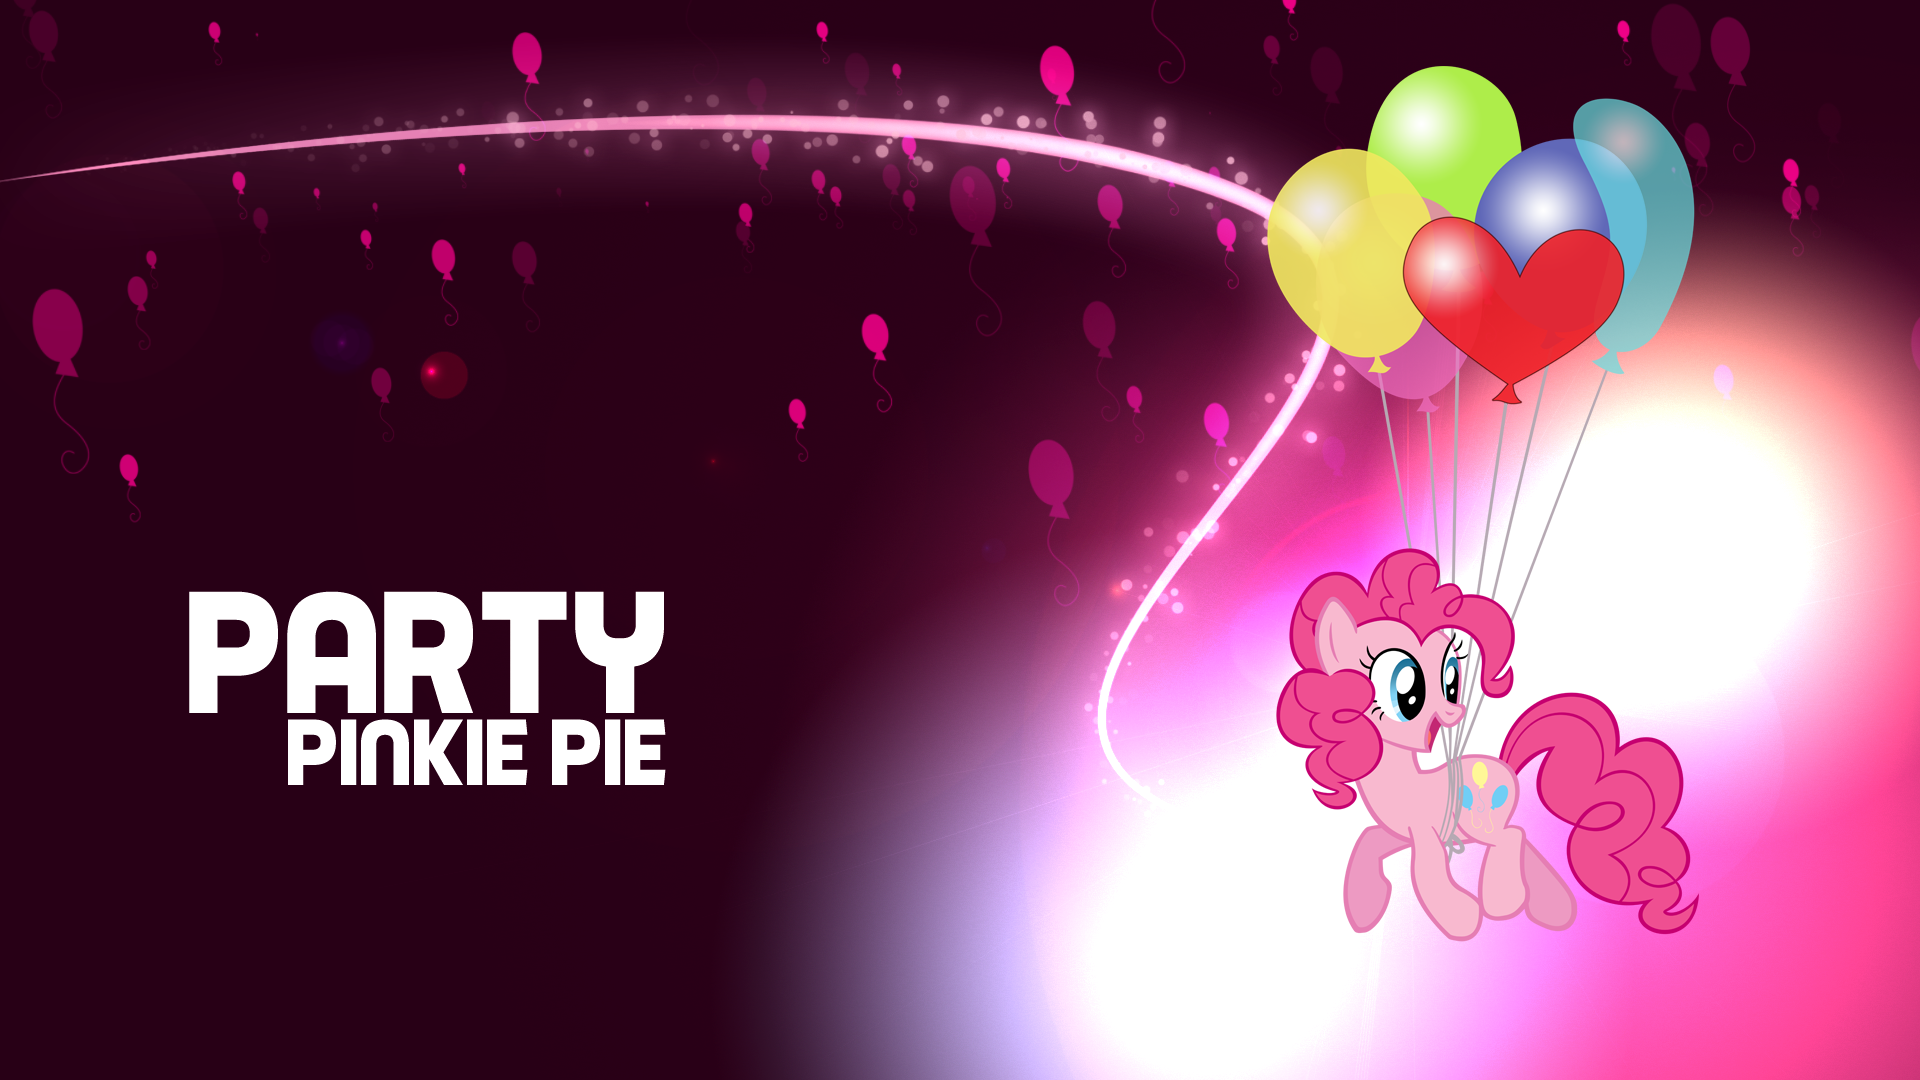 Party - Pinkie Pie by owlet57 and Shryquill